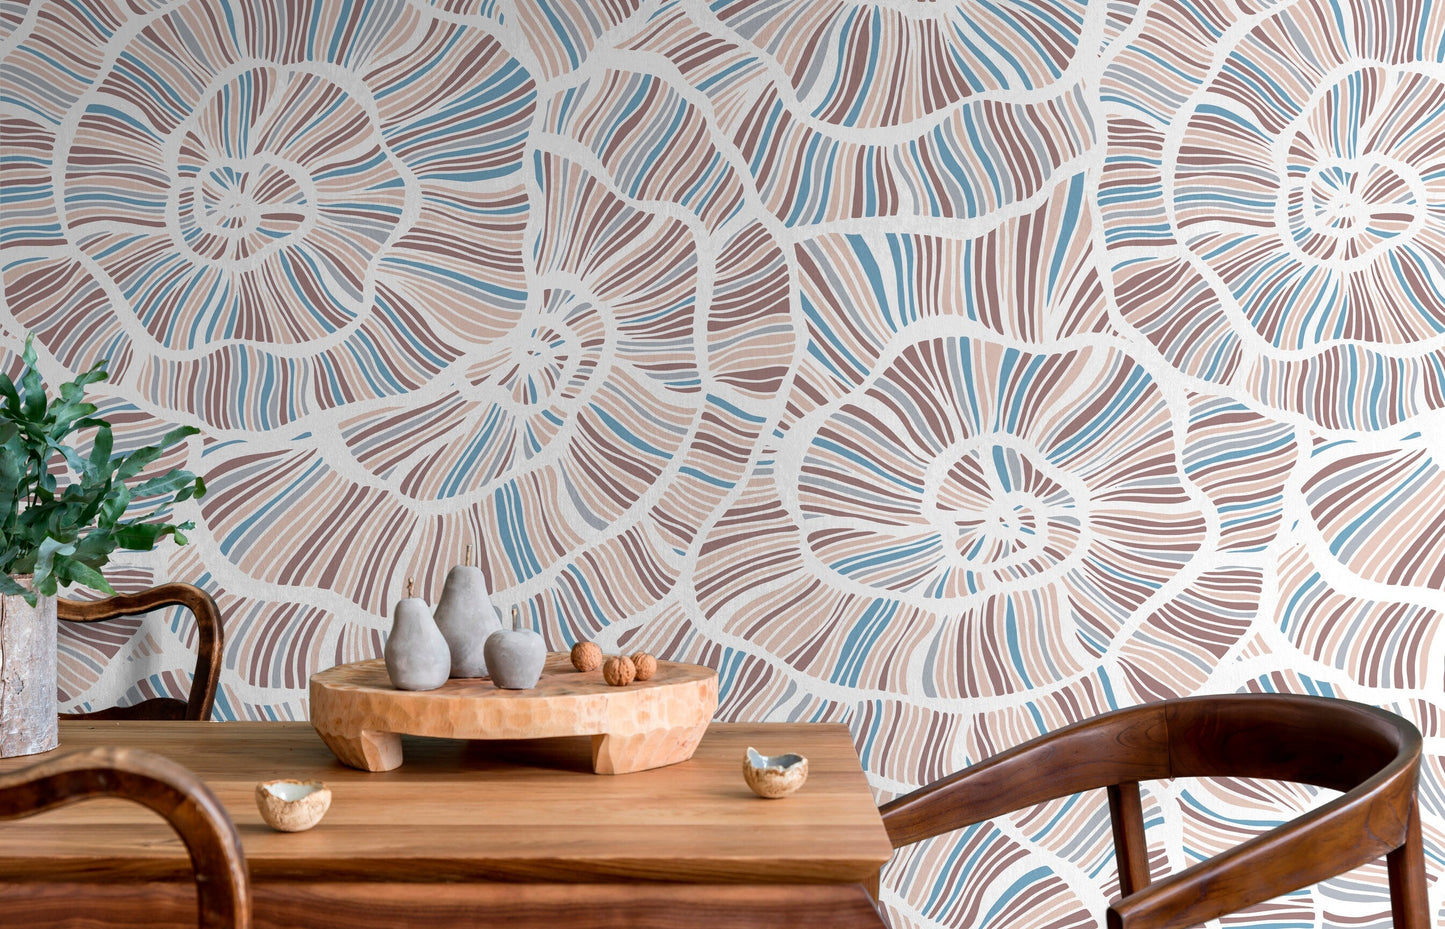 Retro Flowers Removable Wallpaper Wall Paper Wall Mosaico Tiles Wallpaper Wallpaper Print - B784